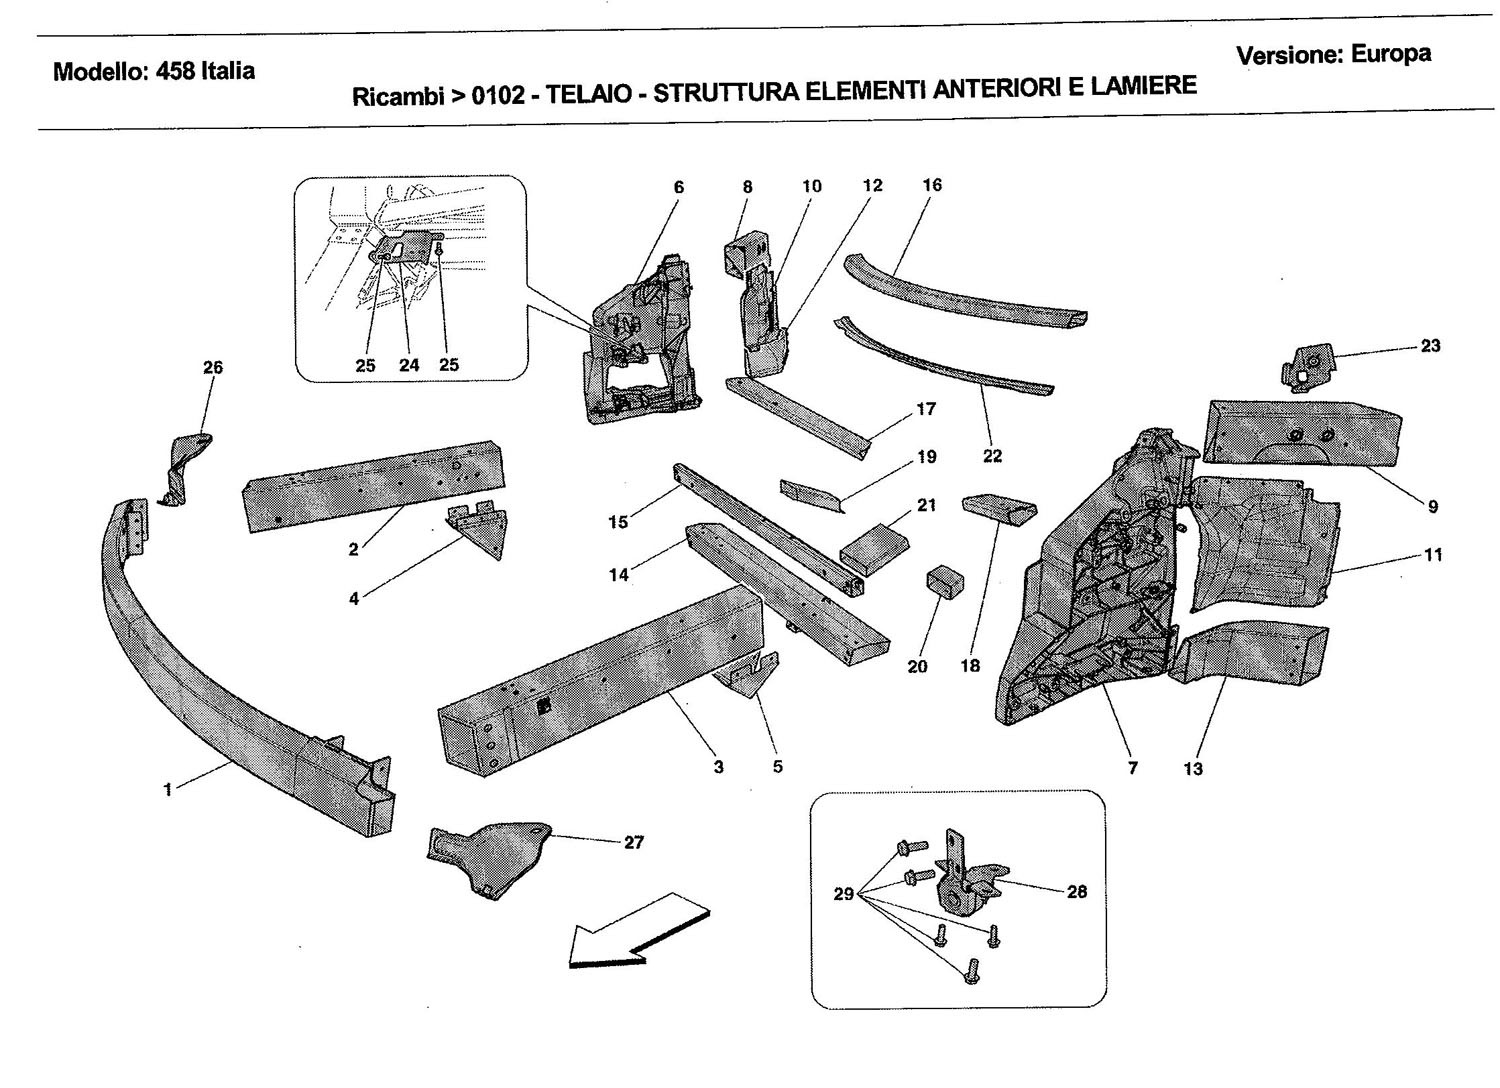 CHASSIS - STRUCTURE, FRONT ELEMENTS AND PANELS